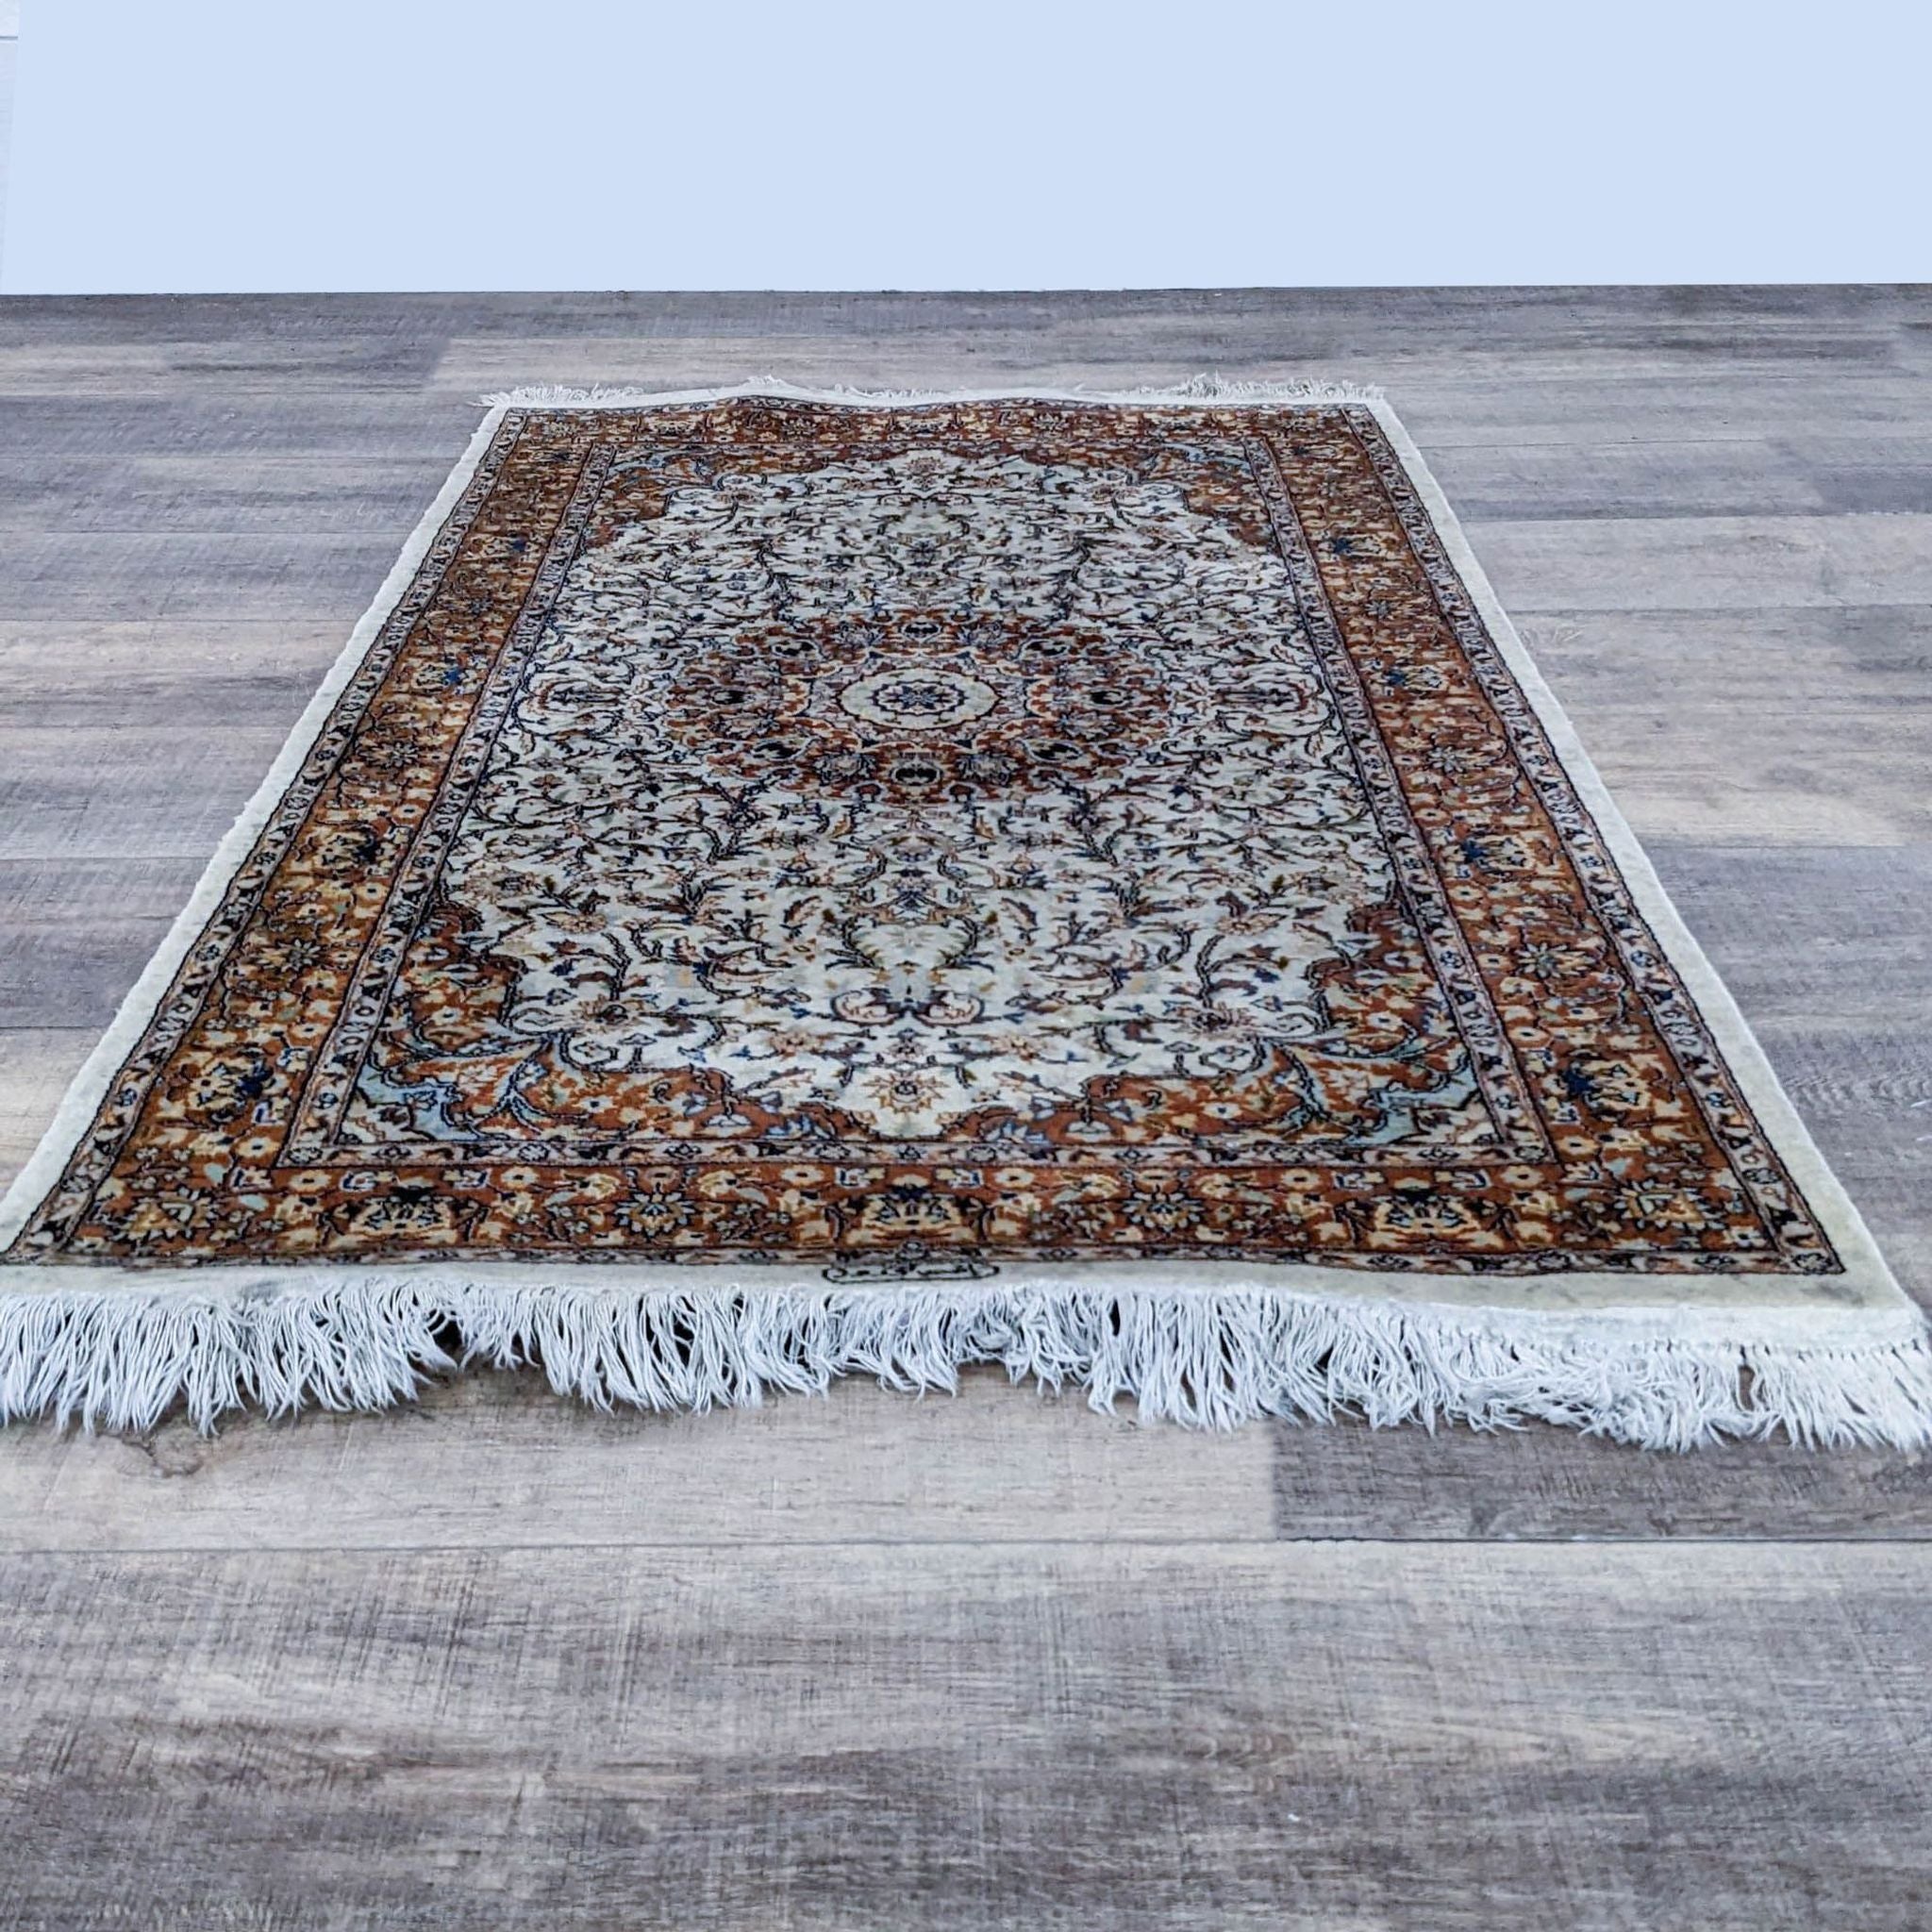 Reperch traditional oriental rug with earth-tone patterns and fringe on a wood floor.